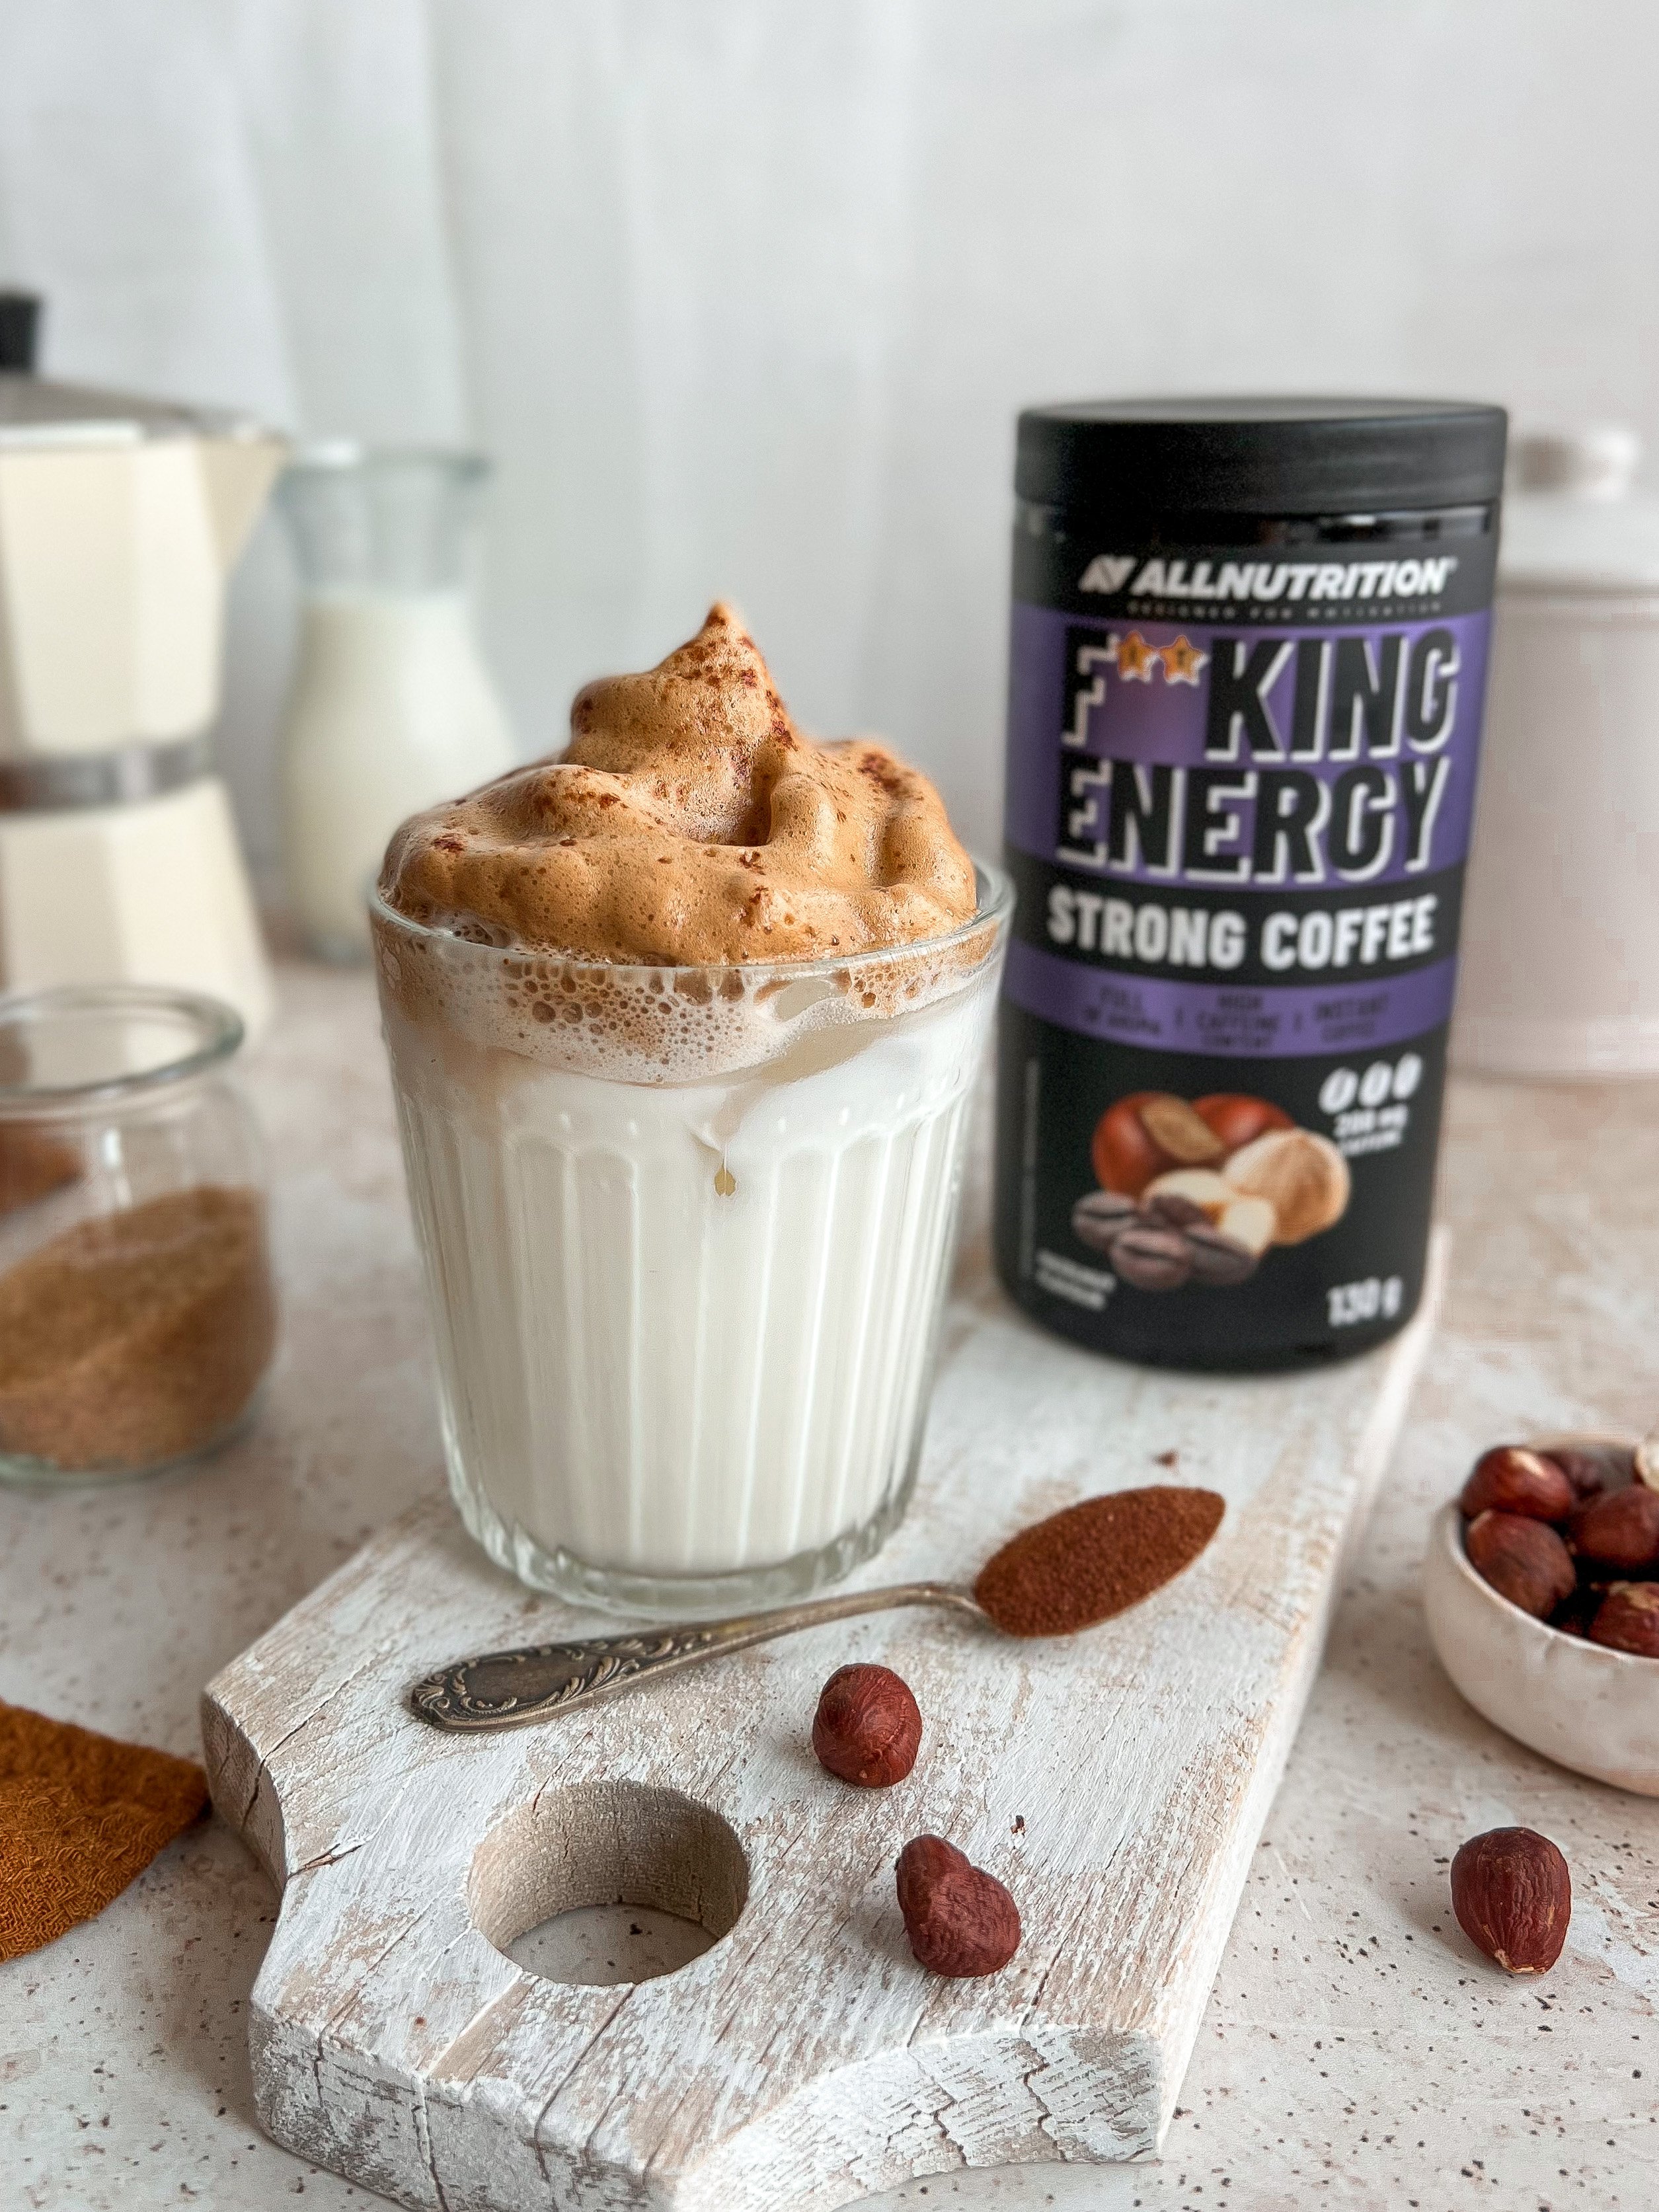 FitKing Energy Strong Coffee